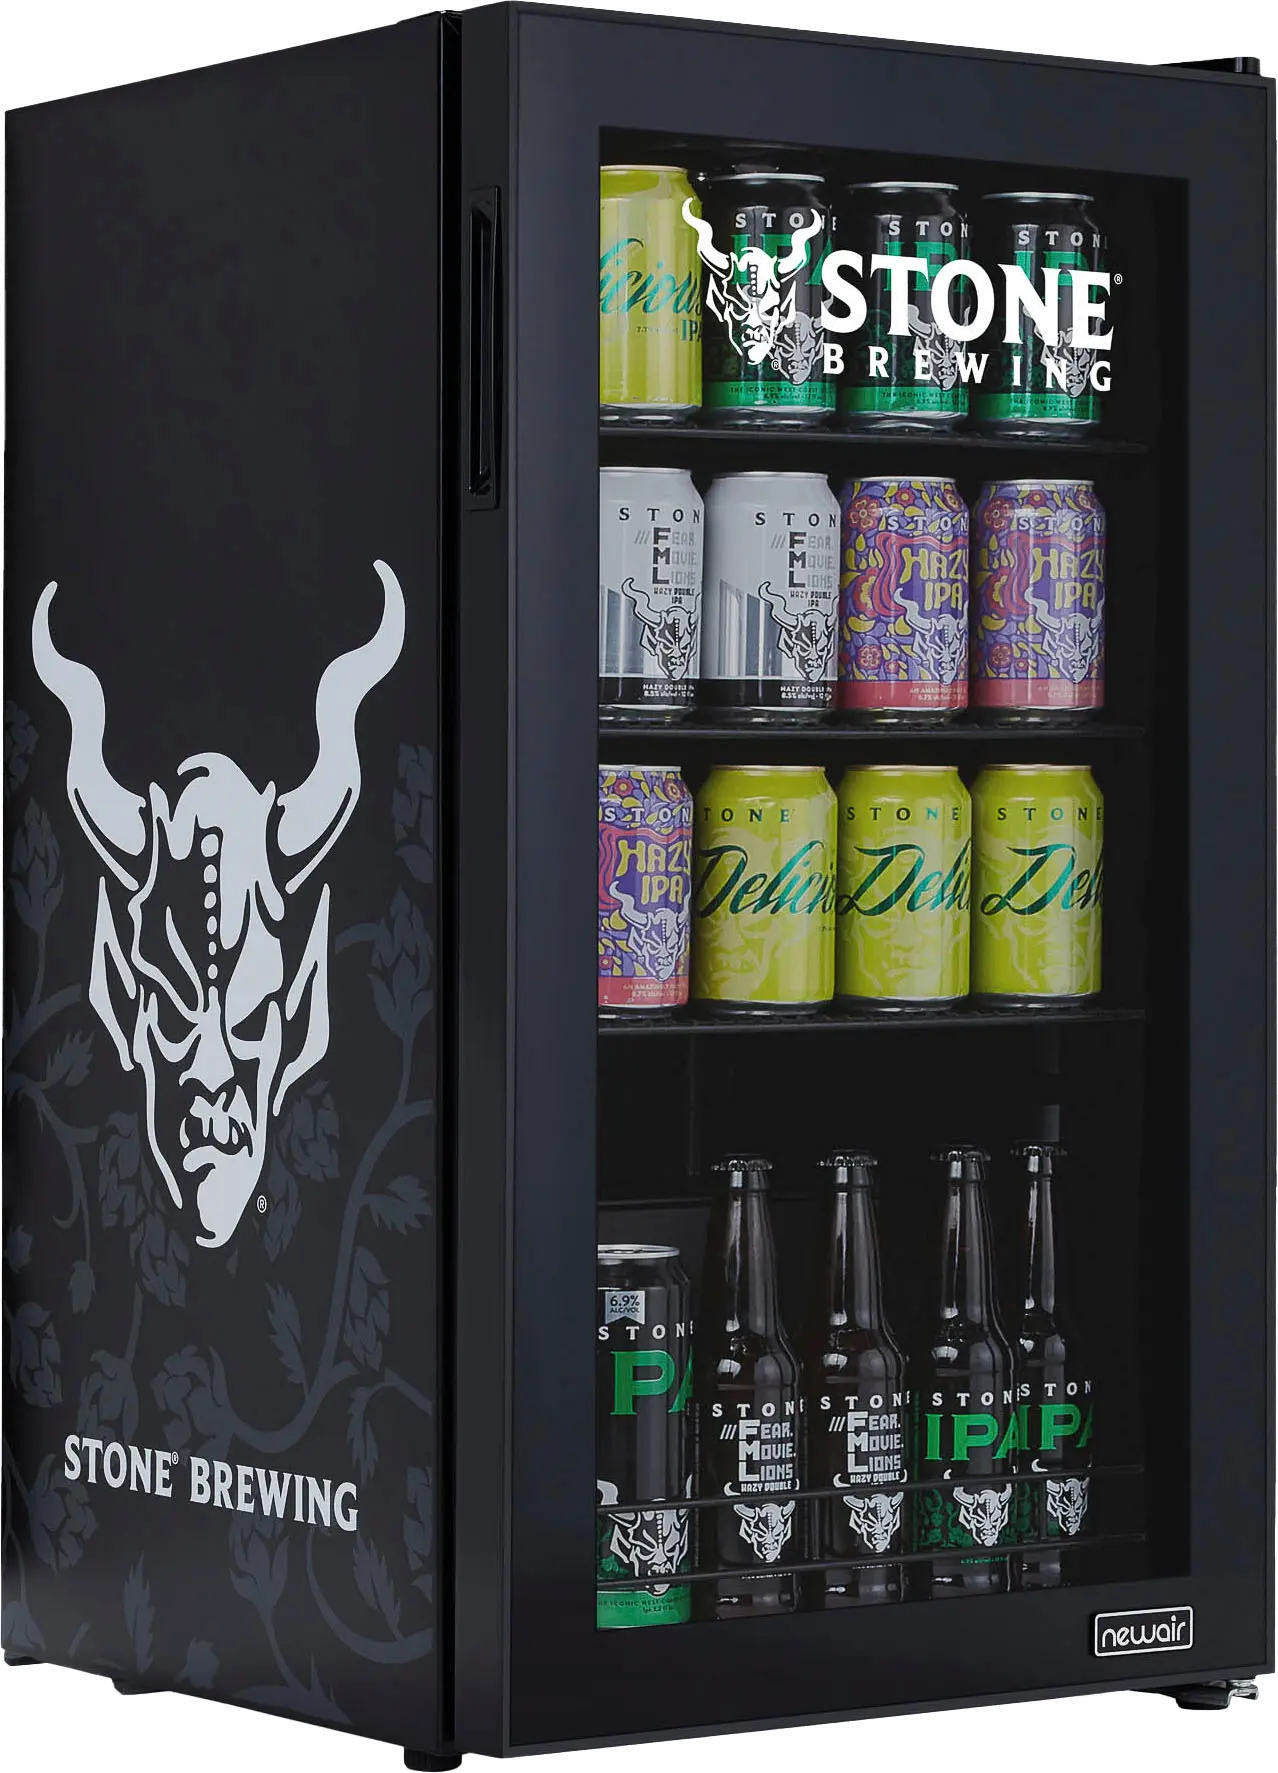 New Air Stone Brewing 126 Can Beverage Refrigerator - Black